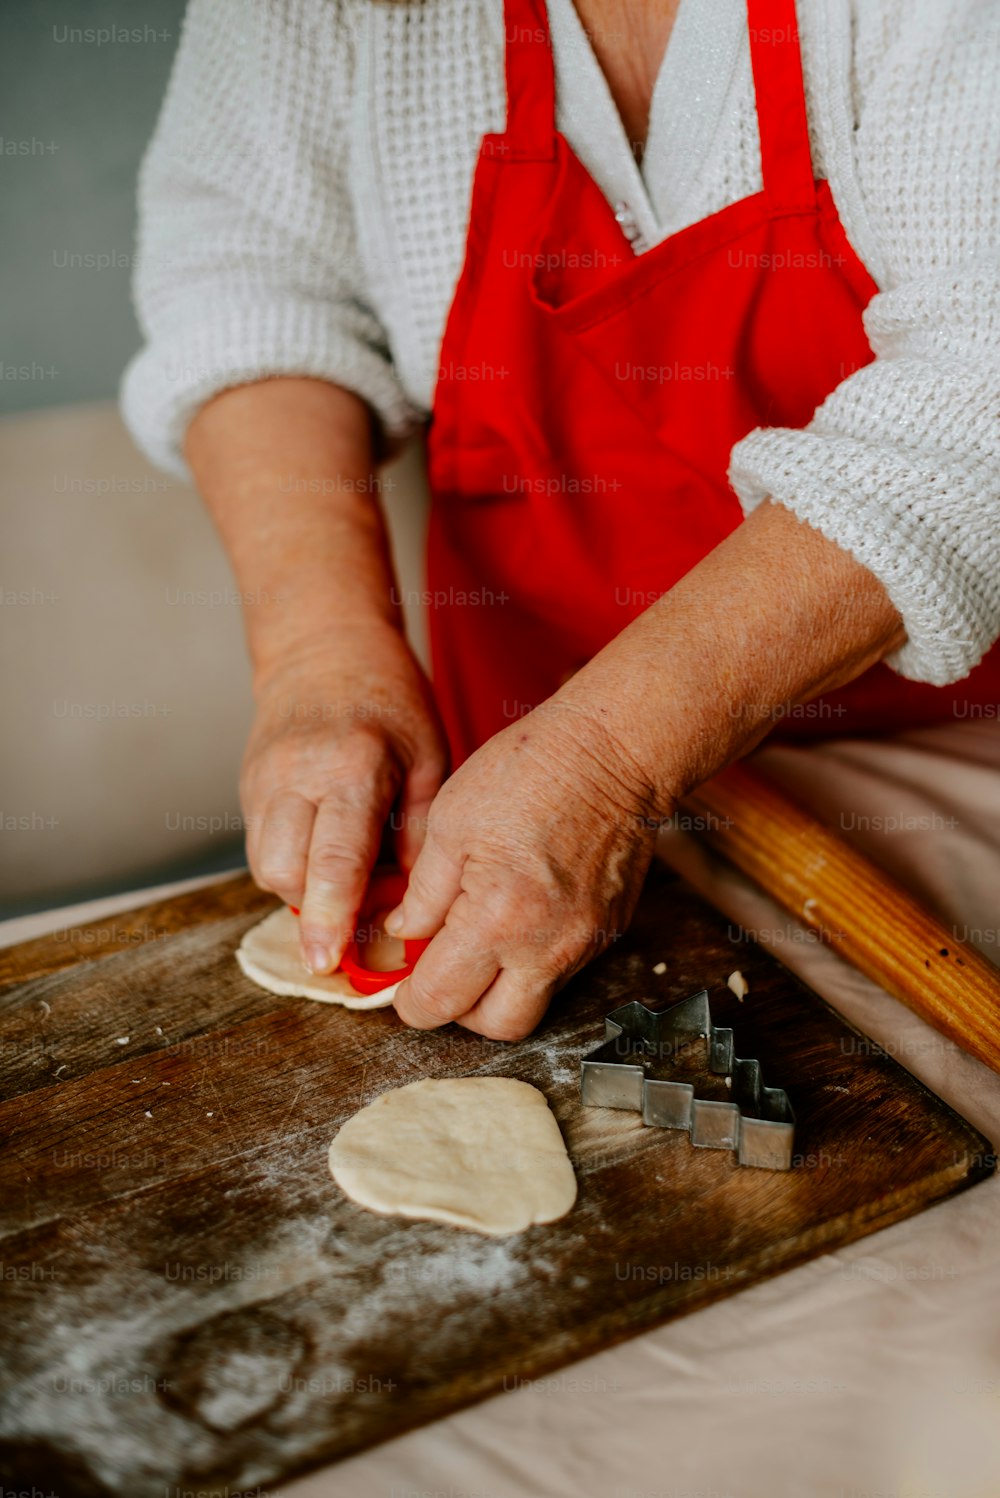 a woman in an apron is kneading dough on a board